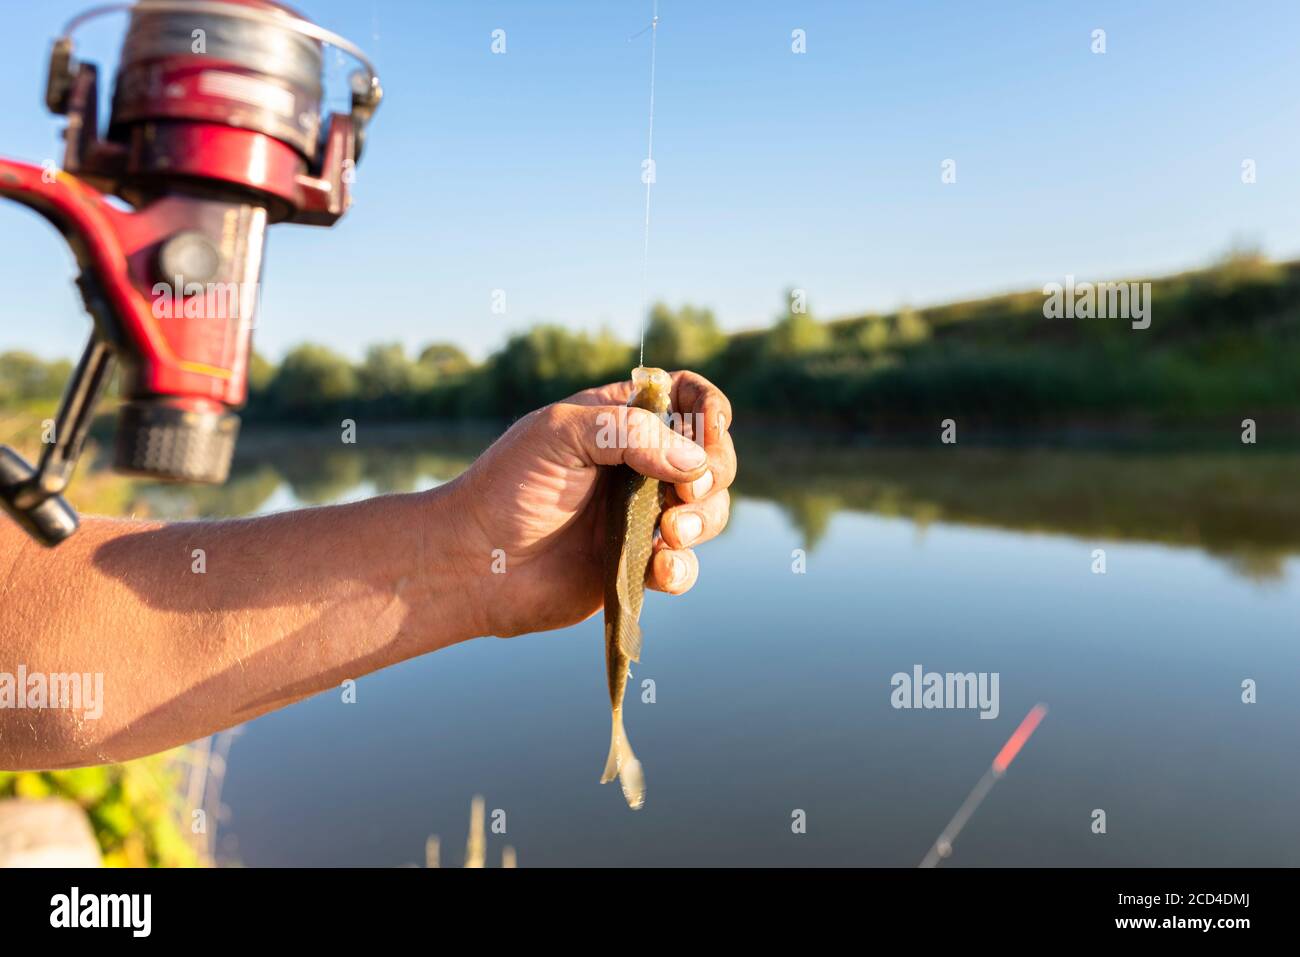 https://c8.alamy.com/comp/2CD4DMJ/the-fisherman-takes-a-crucian-fish-from-a-fishing-hook-visible-hands-of-a-man-and-a-pond-in-the-background-2CD4DMJ.jpg